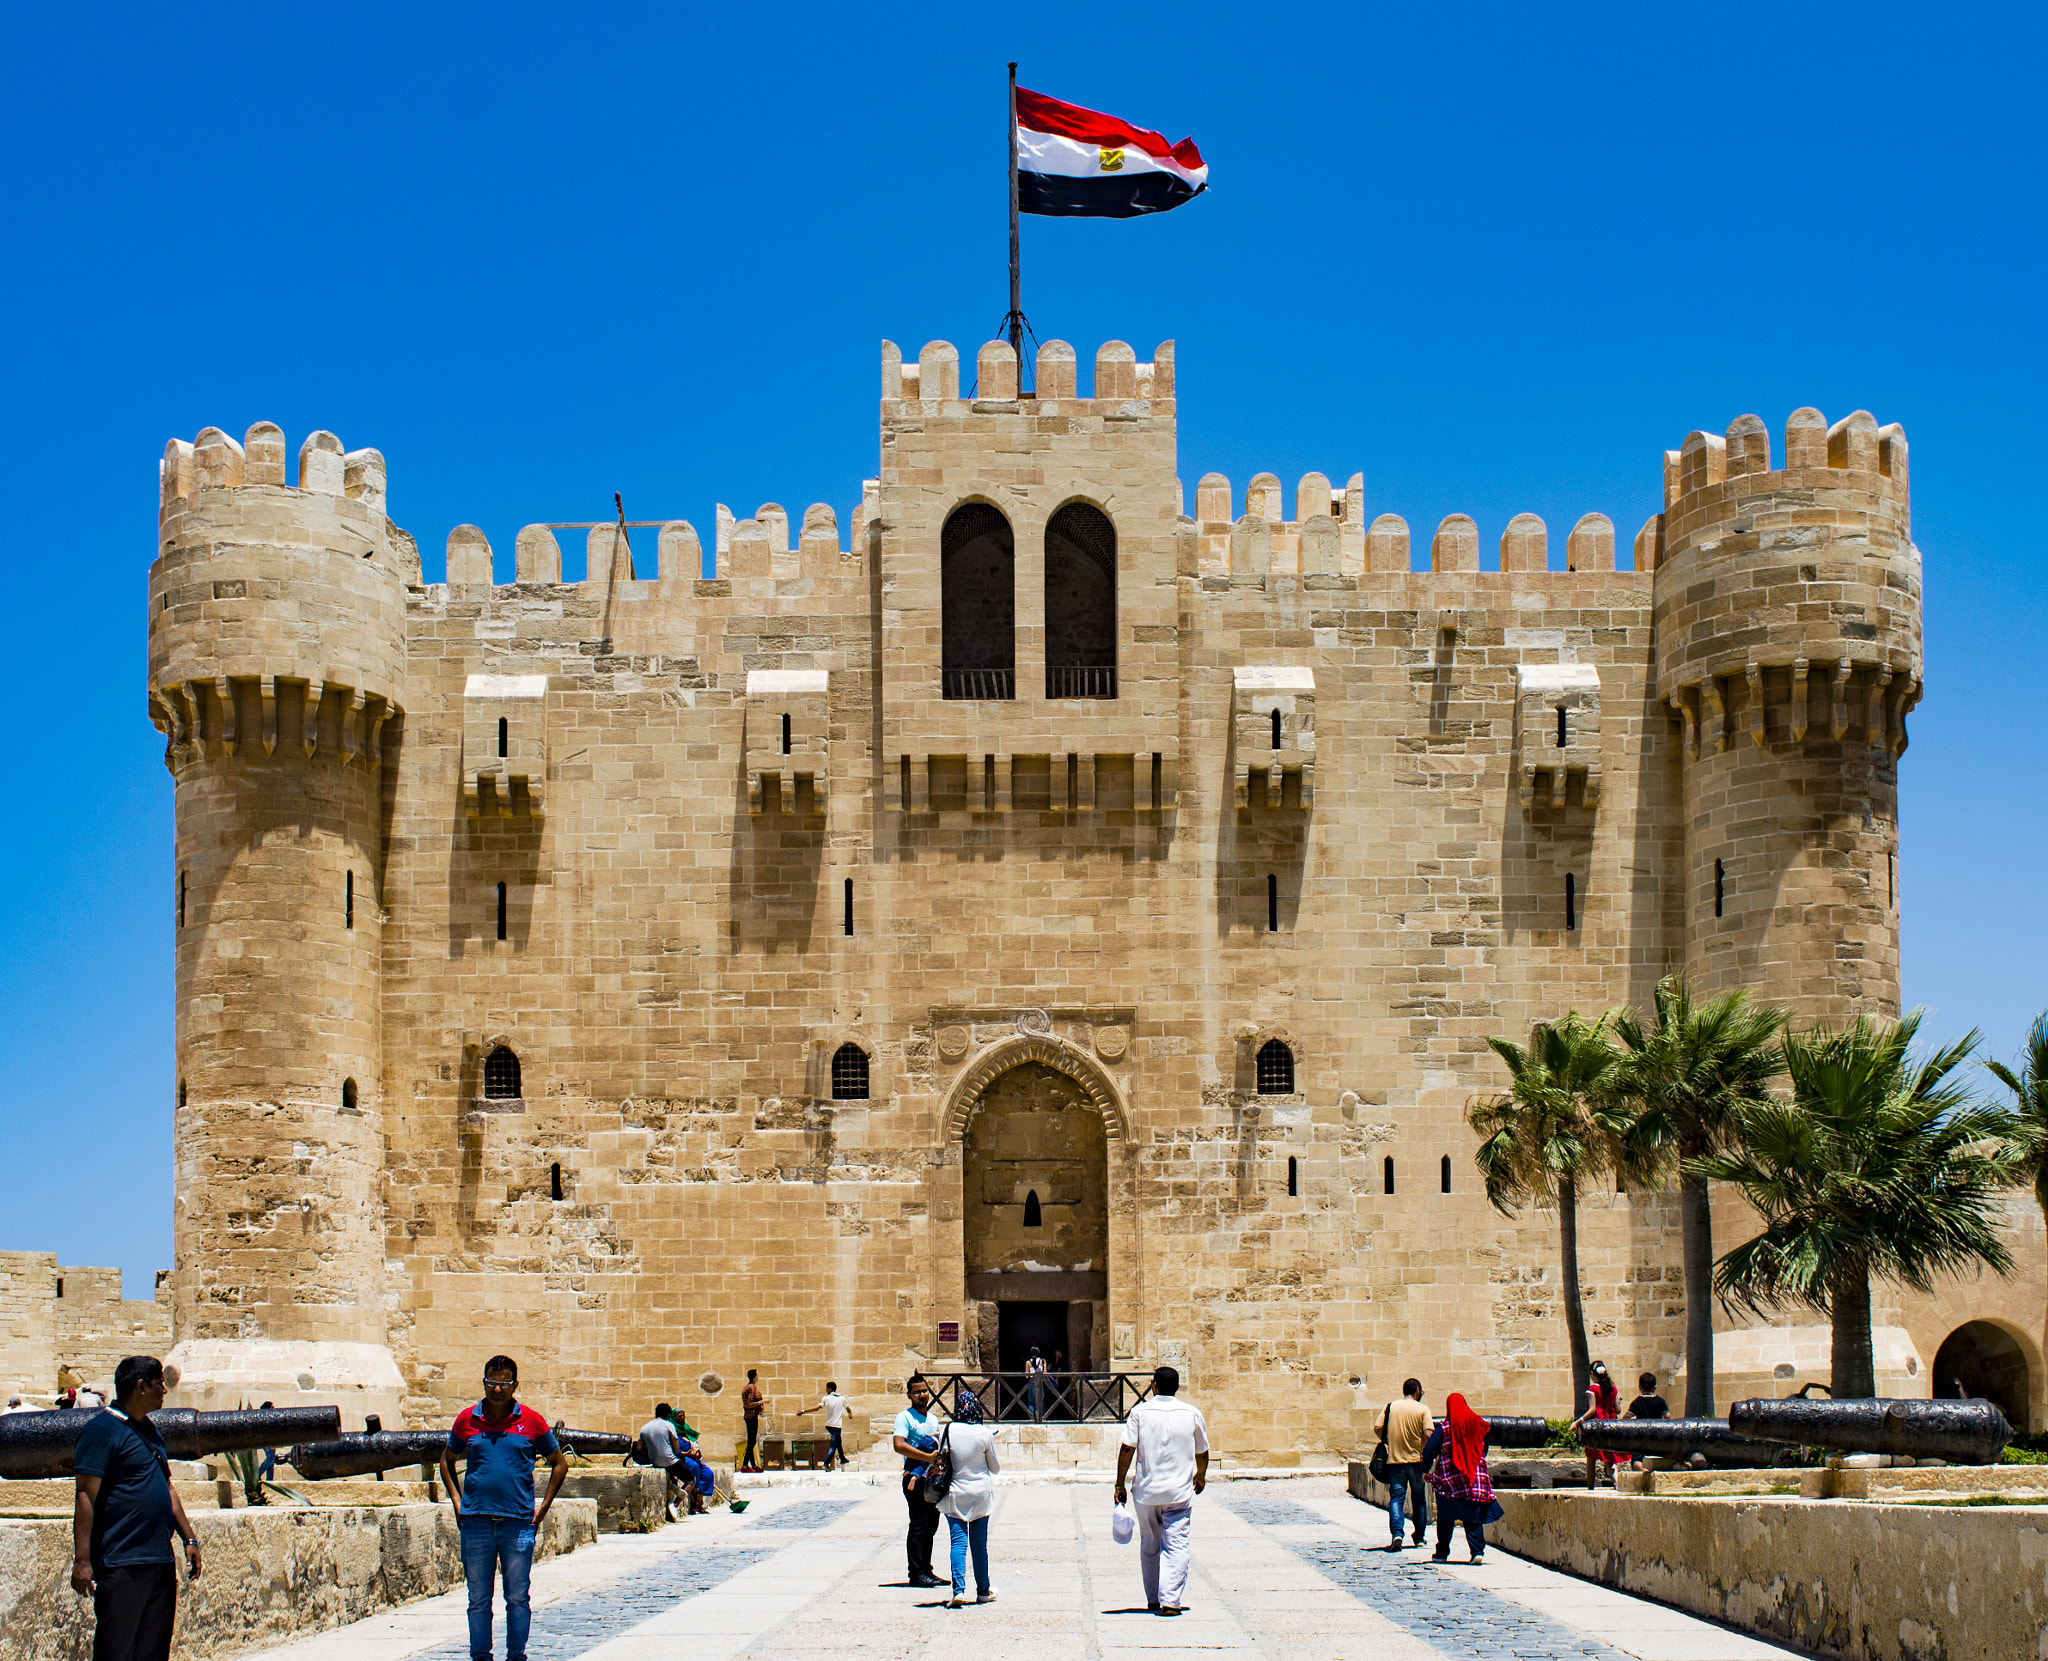 Qaitbey Fort, Alexandria- believed to have been built by the Mamluks using the stones of the Pharos of Alexandria